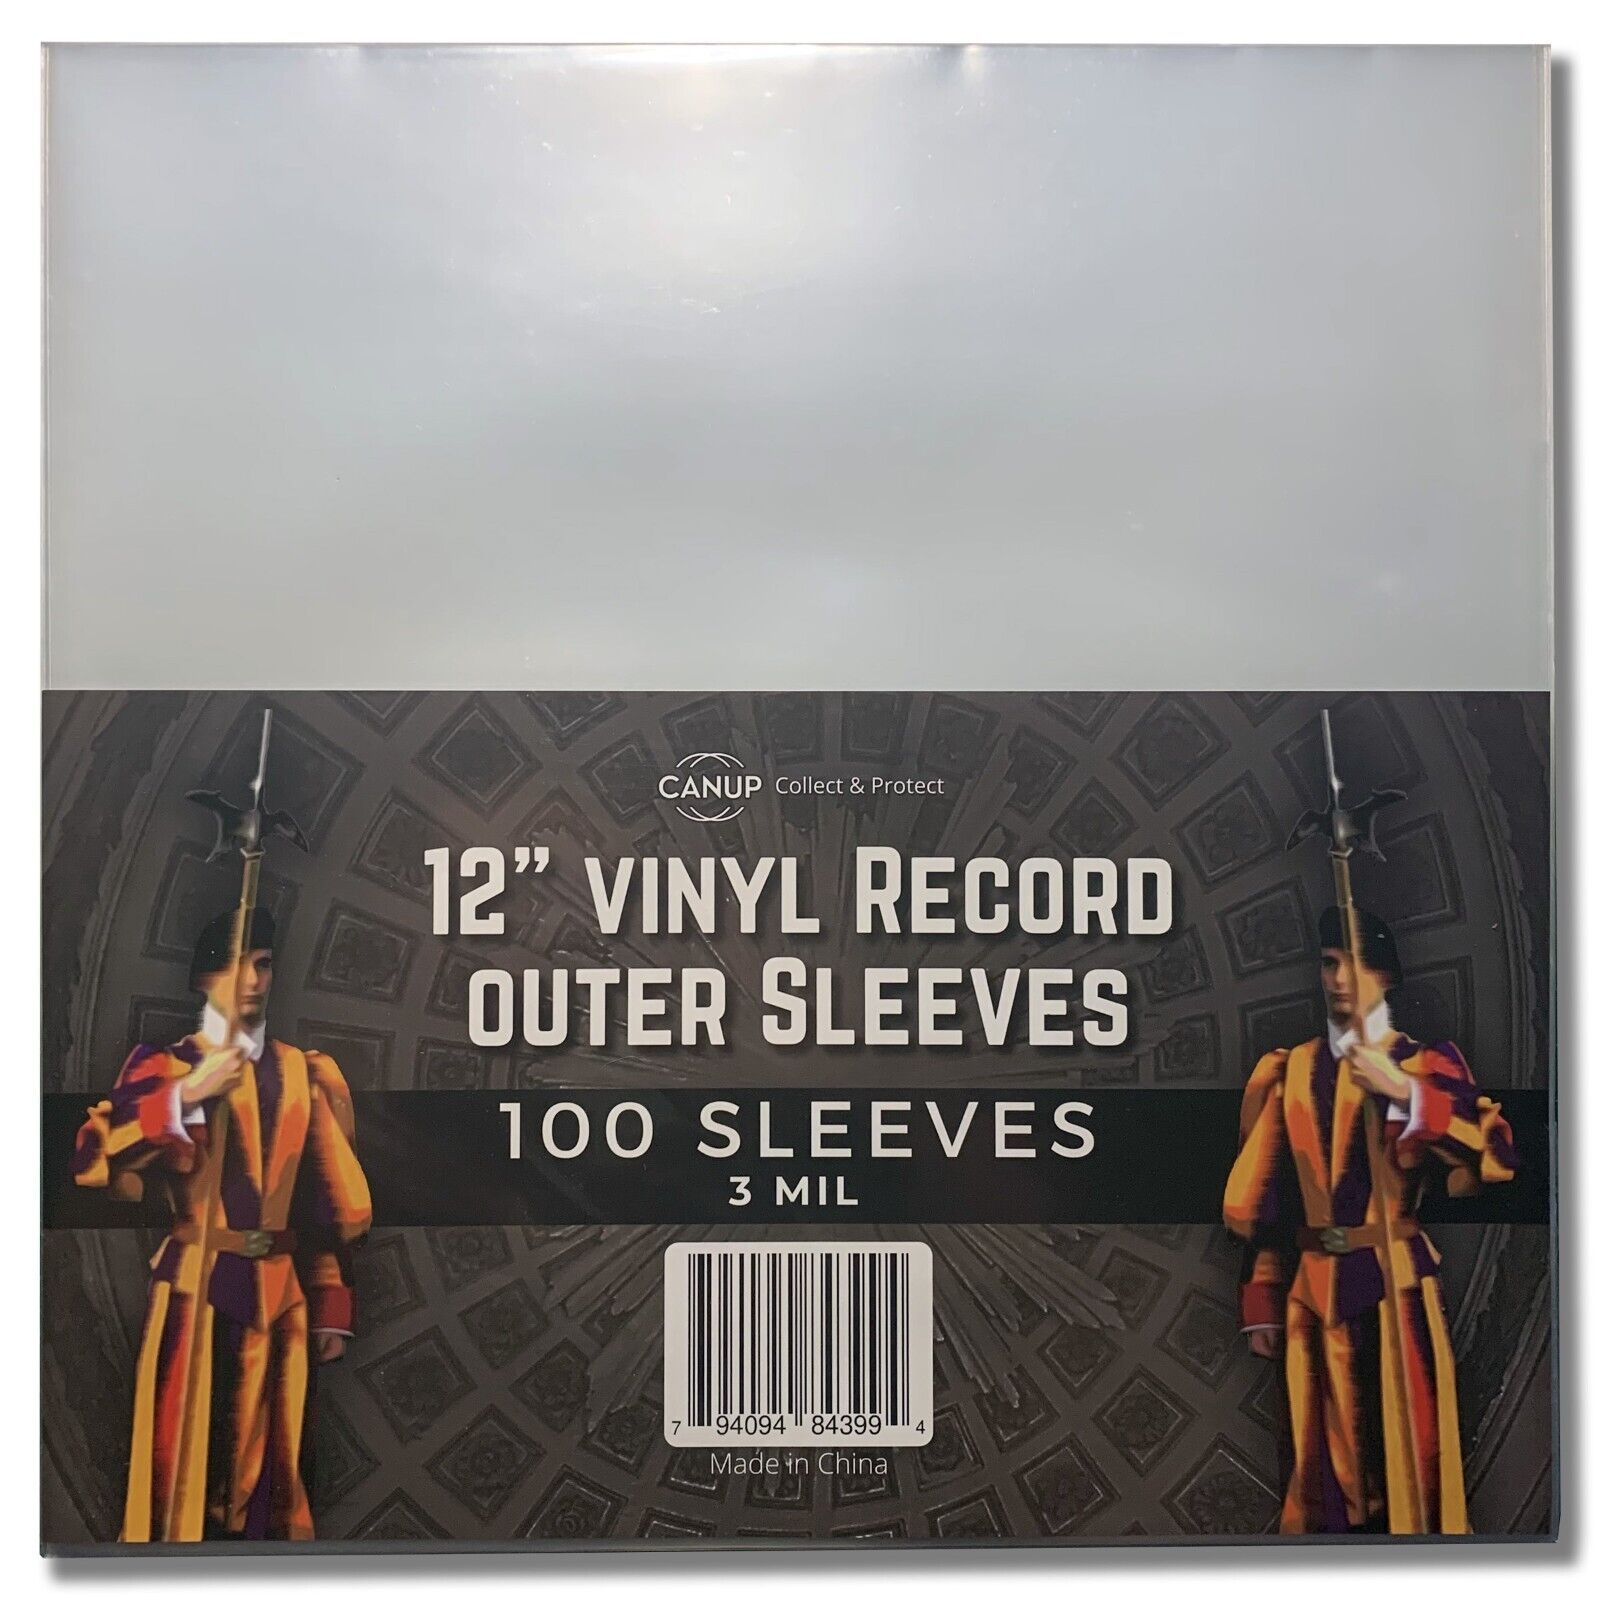 100 Clear LP Outer Sleeves 3 Mil High Quality Vinyl Record Album Covers